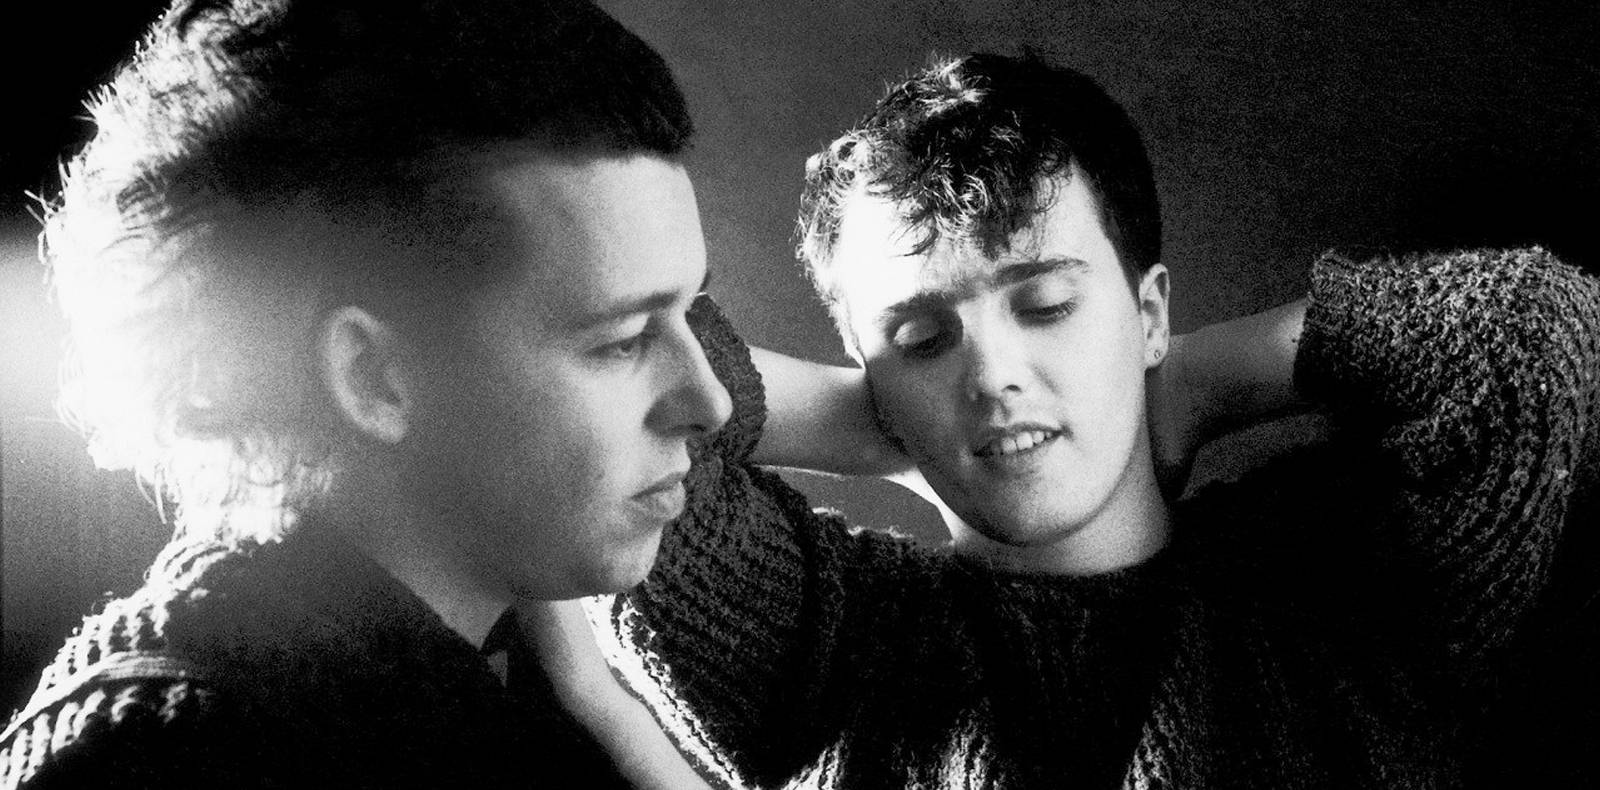 Tears For Fears - Mad World (Official Music Video) 